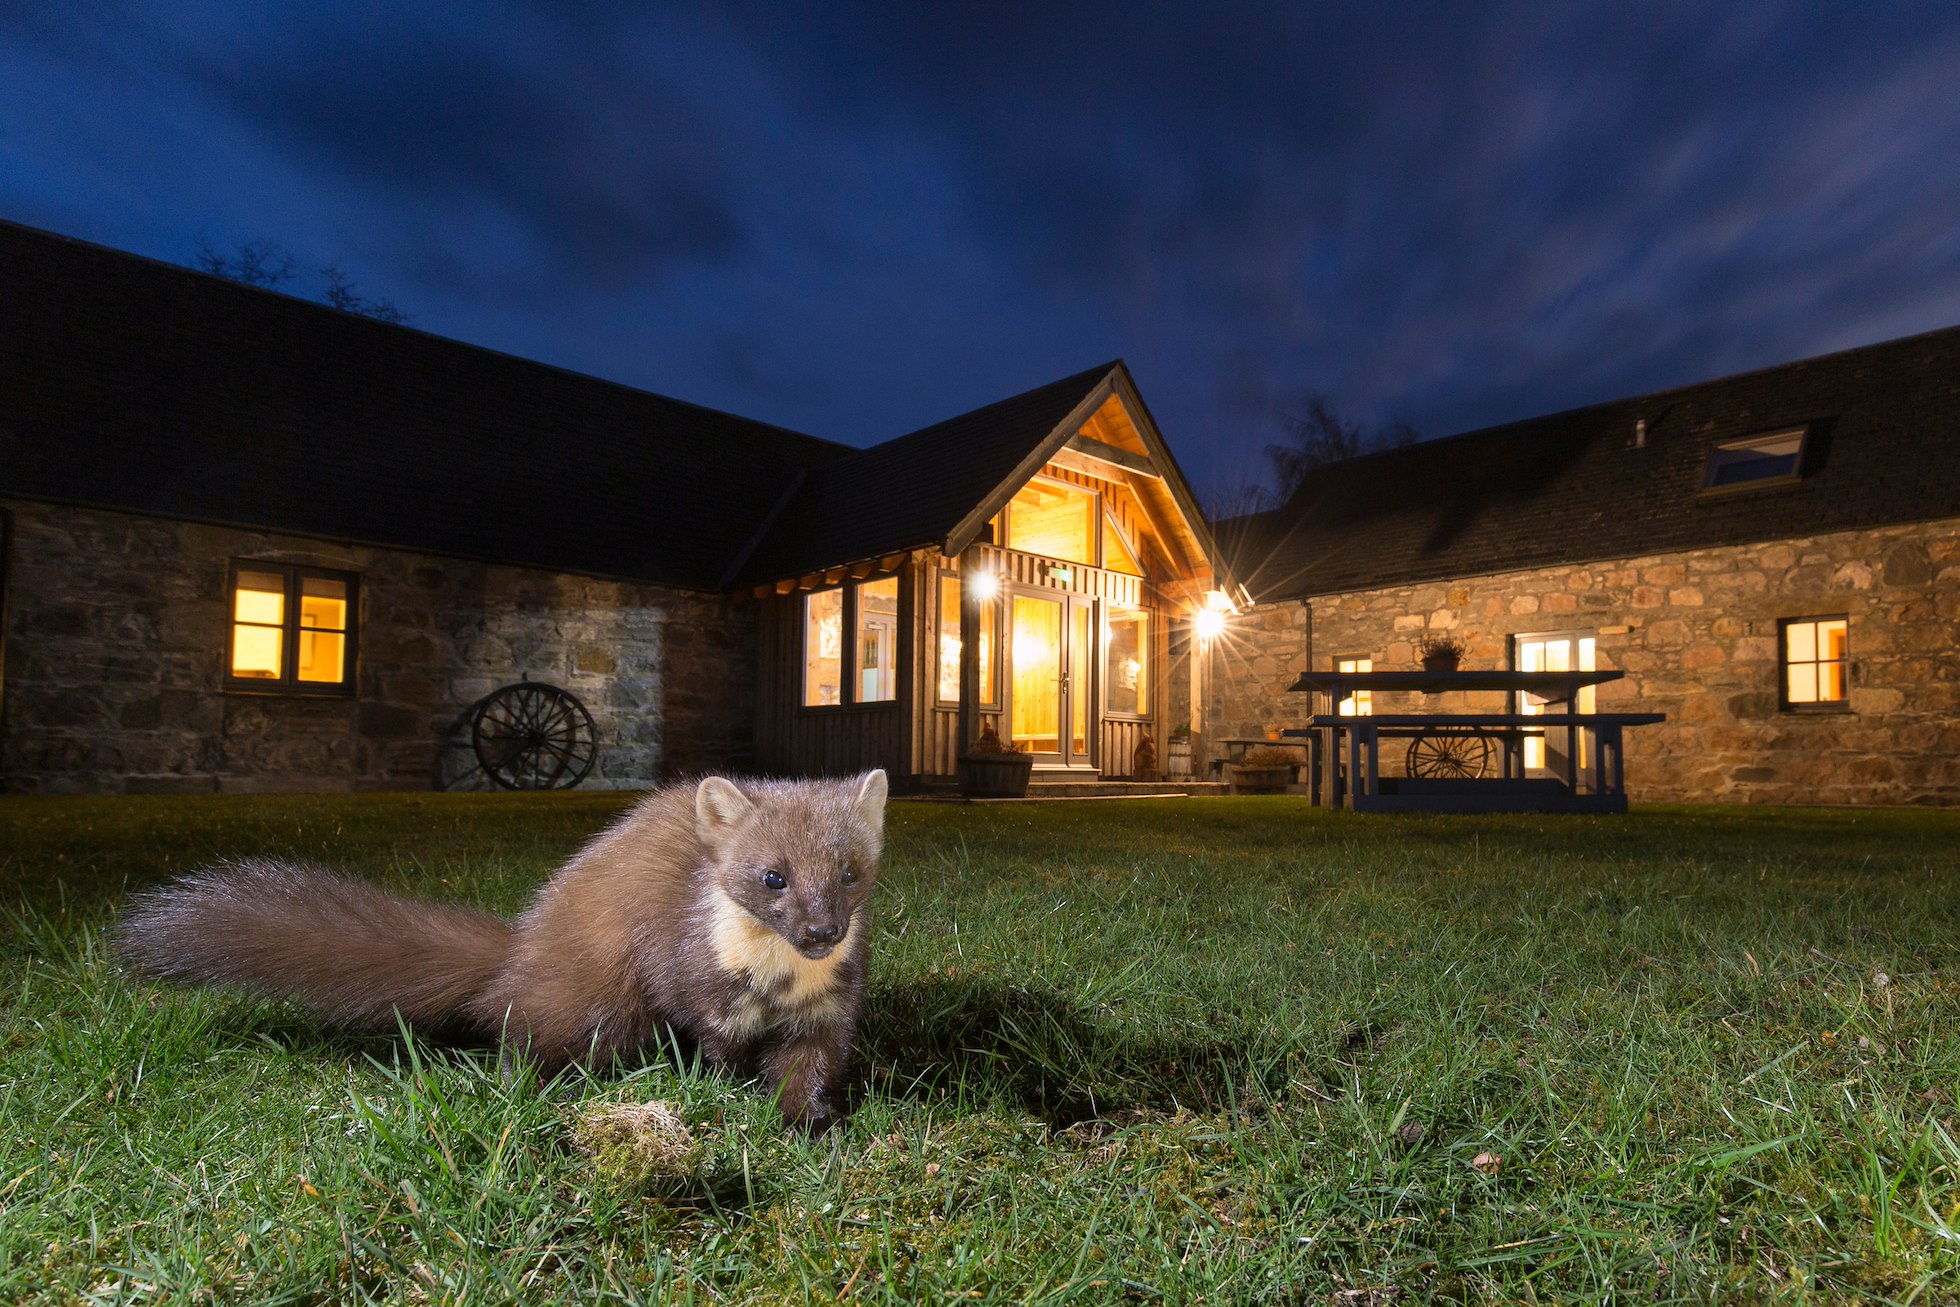 Pine marten (Martes martes) in front of building at night, Cairngorms, Scotland.